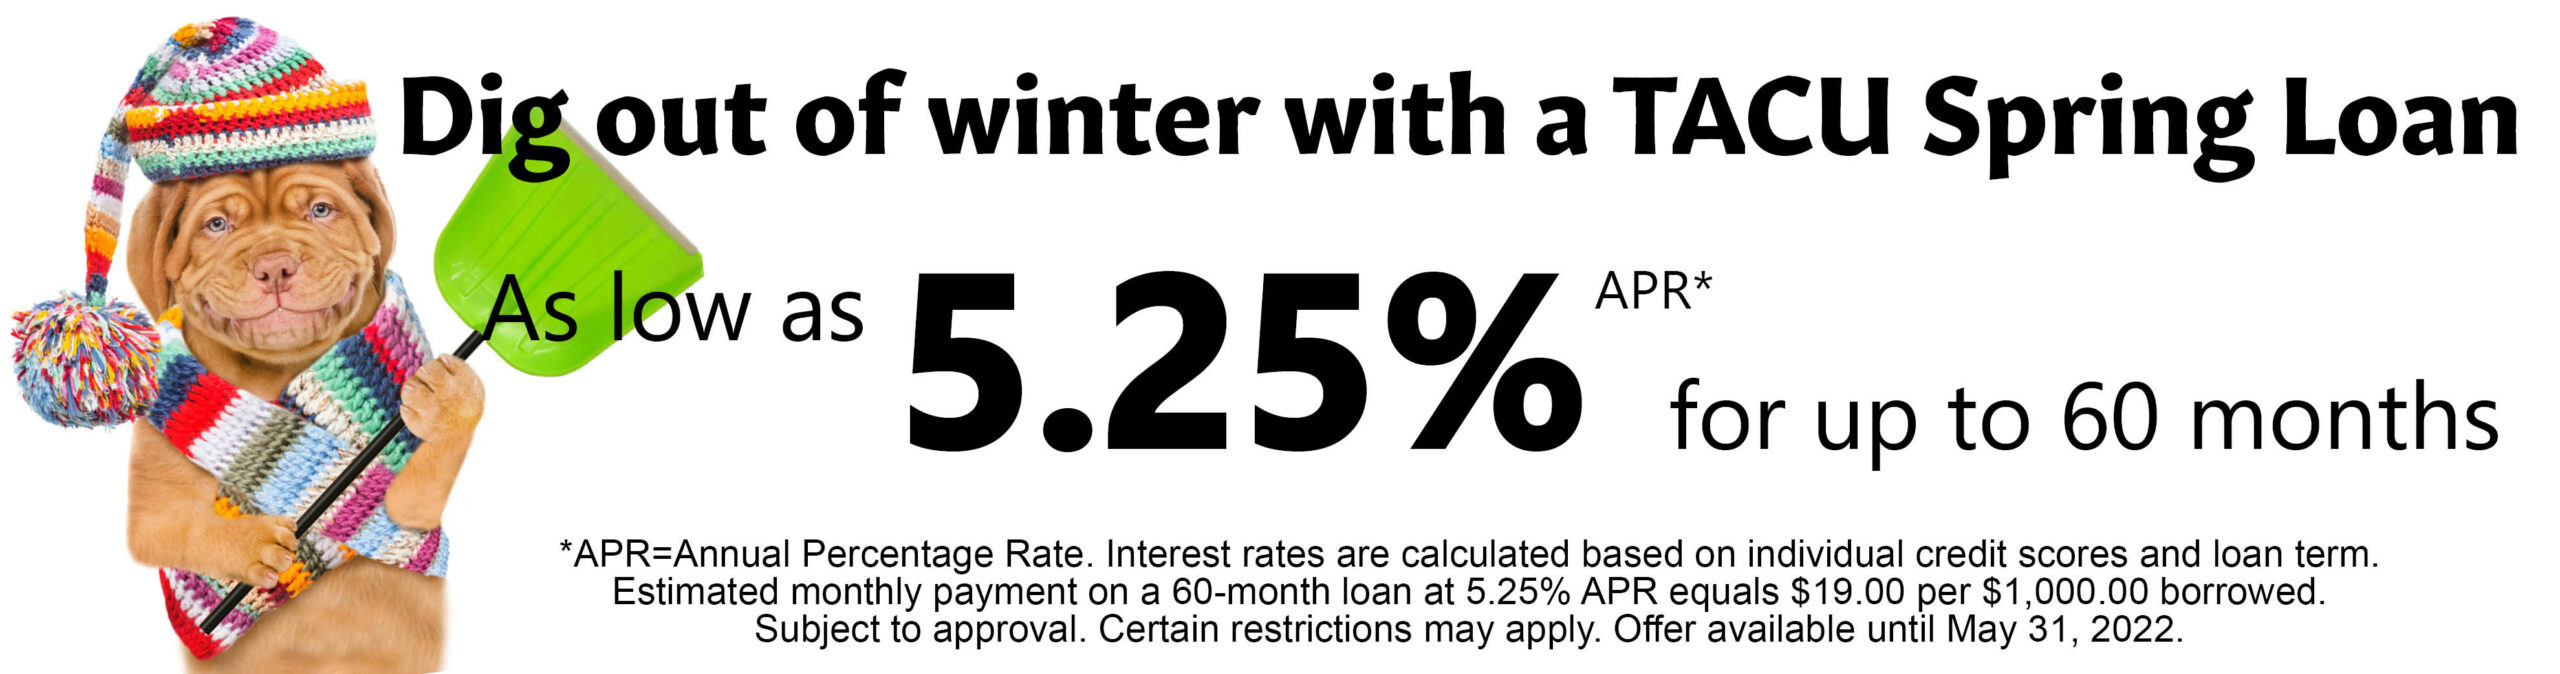 Dig out of winter with a TACU Spring Loan as low as 5.25% Annual Percentage Rate for up to 60 months. Interest rates are calculated based on individual credit scores and loan terms. Estimated monthly payment on a 60-month loan at 5.25% Annual Percentage Rate equals $19.00 per $1,000 borrowed. Subject to approval. Certain restrictions may apply. Offer available until May 31, 2022. 